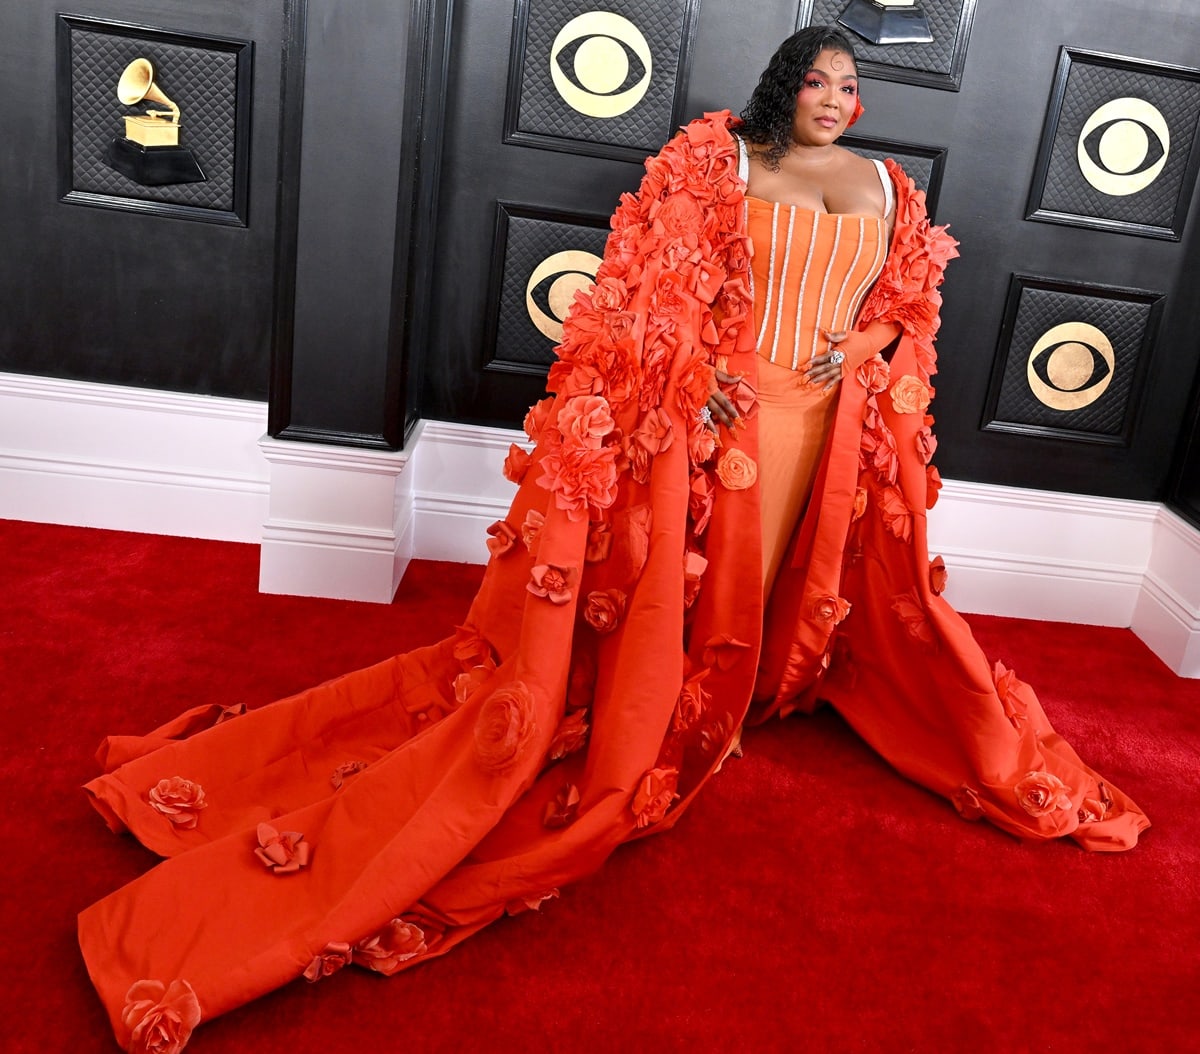 Lizzo walked the red carpet at the 65th annual Grammy Awards in a cherry-colored Dolce & Gabbana gown with floral accents